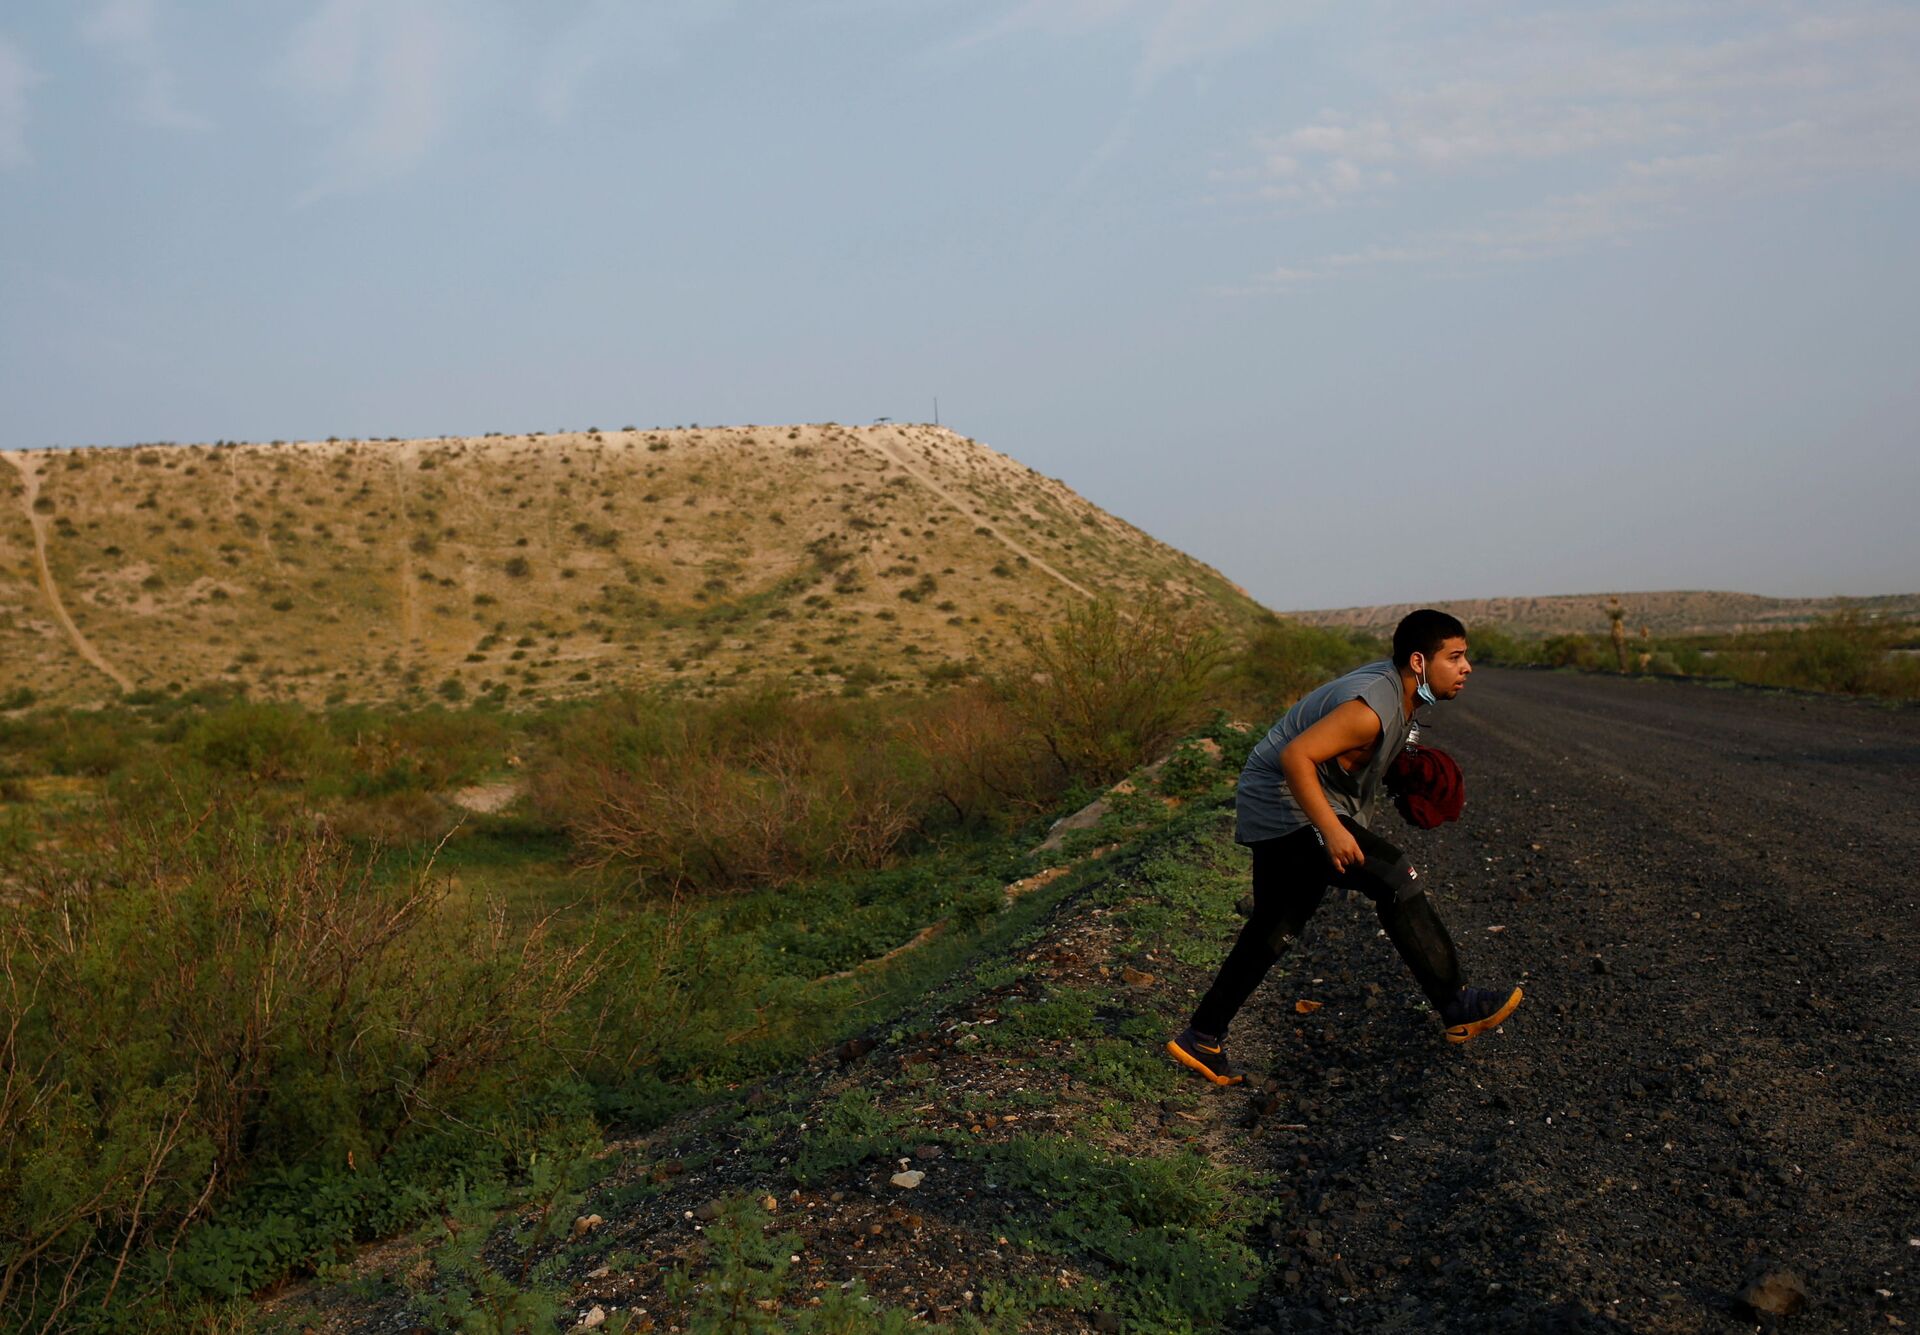 A migrant from Guatemala runs to hide from U.S. Border Patrol after crossing into the United States from Mexico, in Sunland Park, New Mexico, U.S., July 22, 2021 - Sputnik International, 1920, 07.09.2021